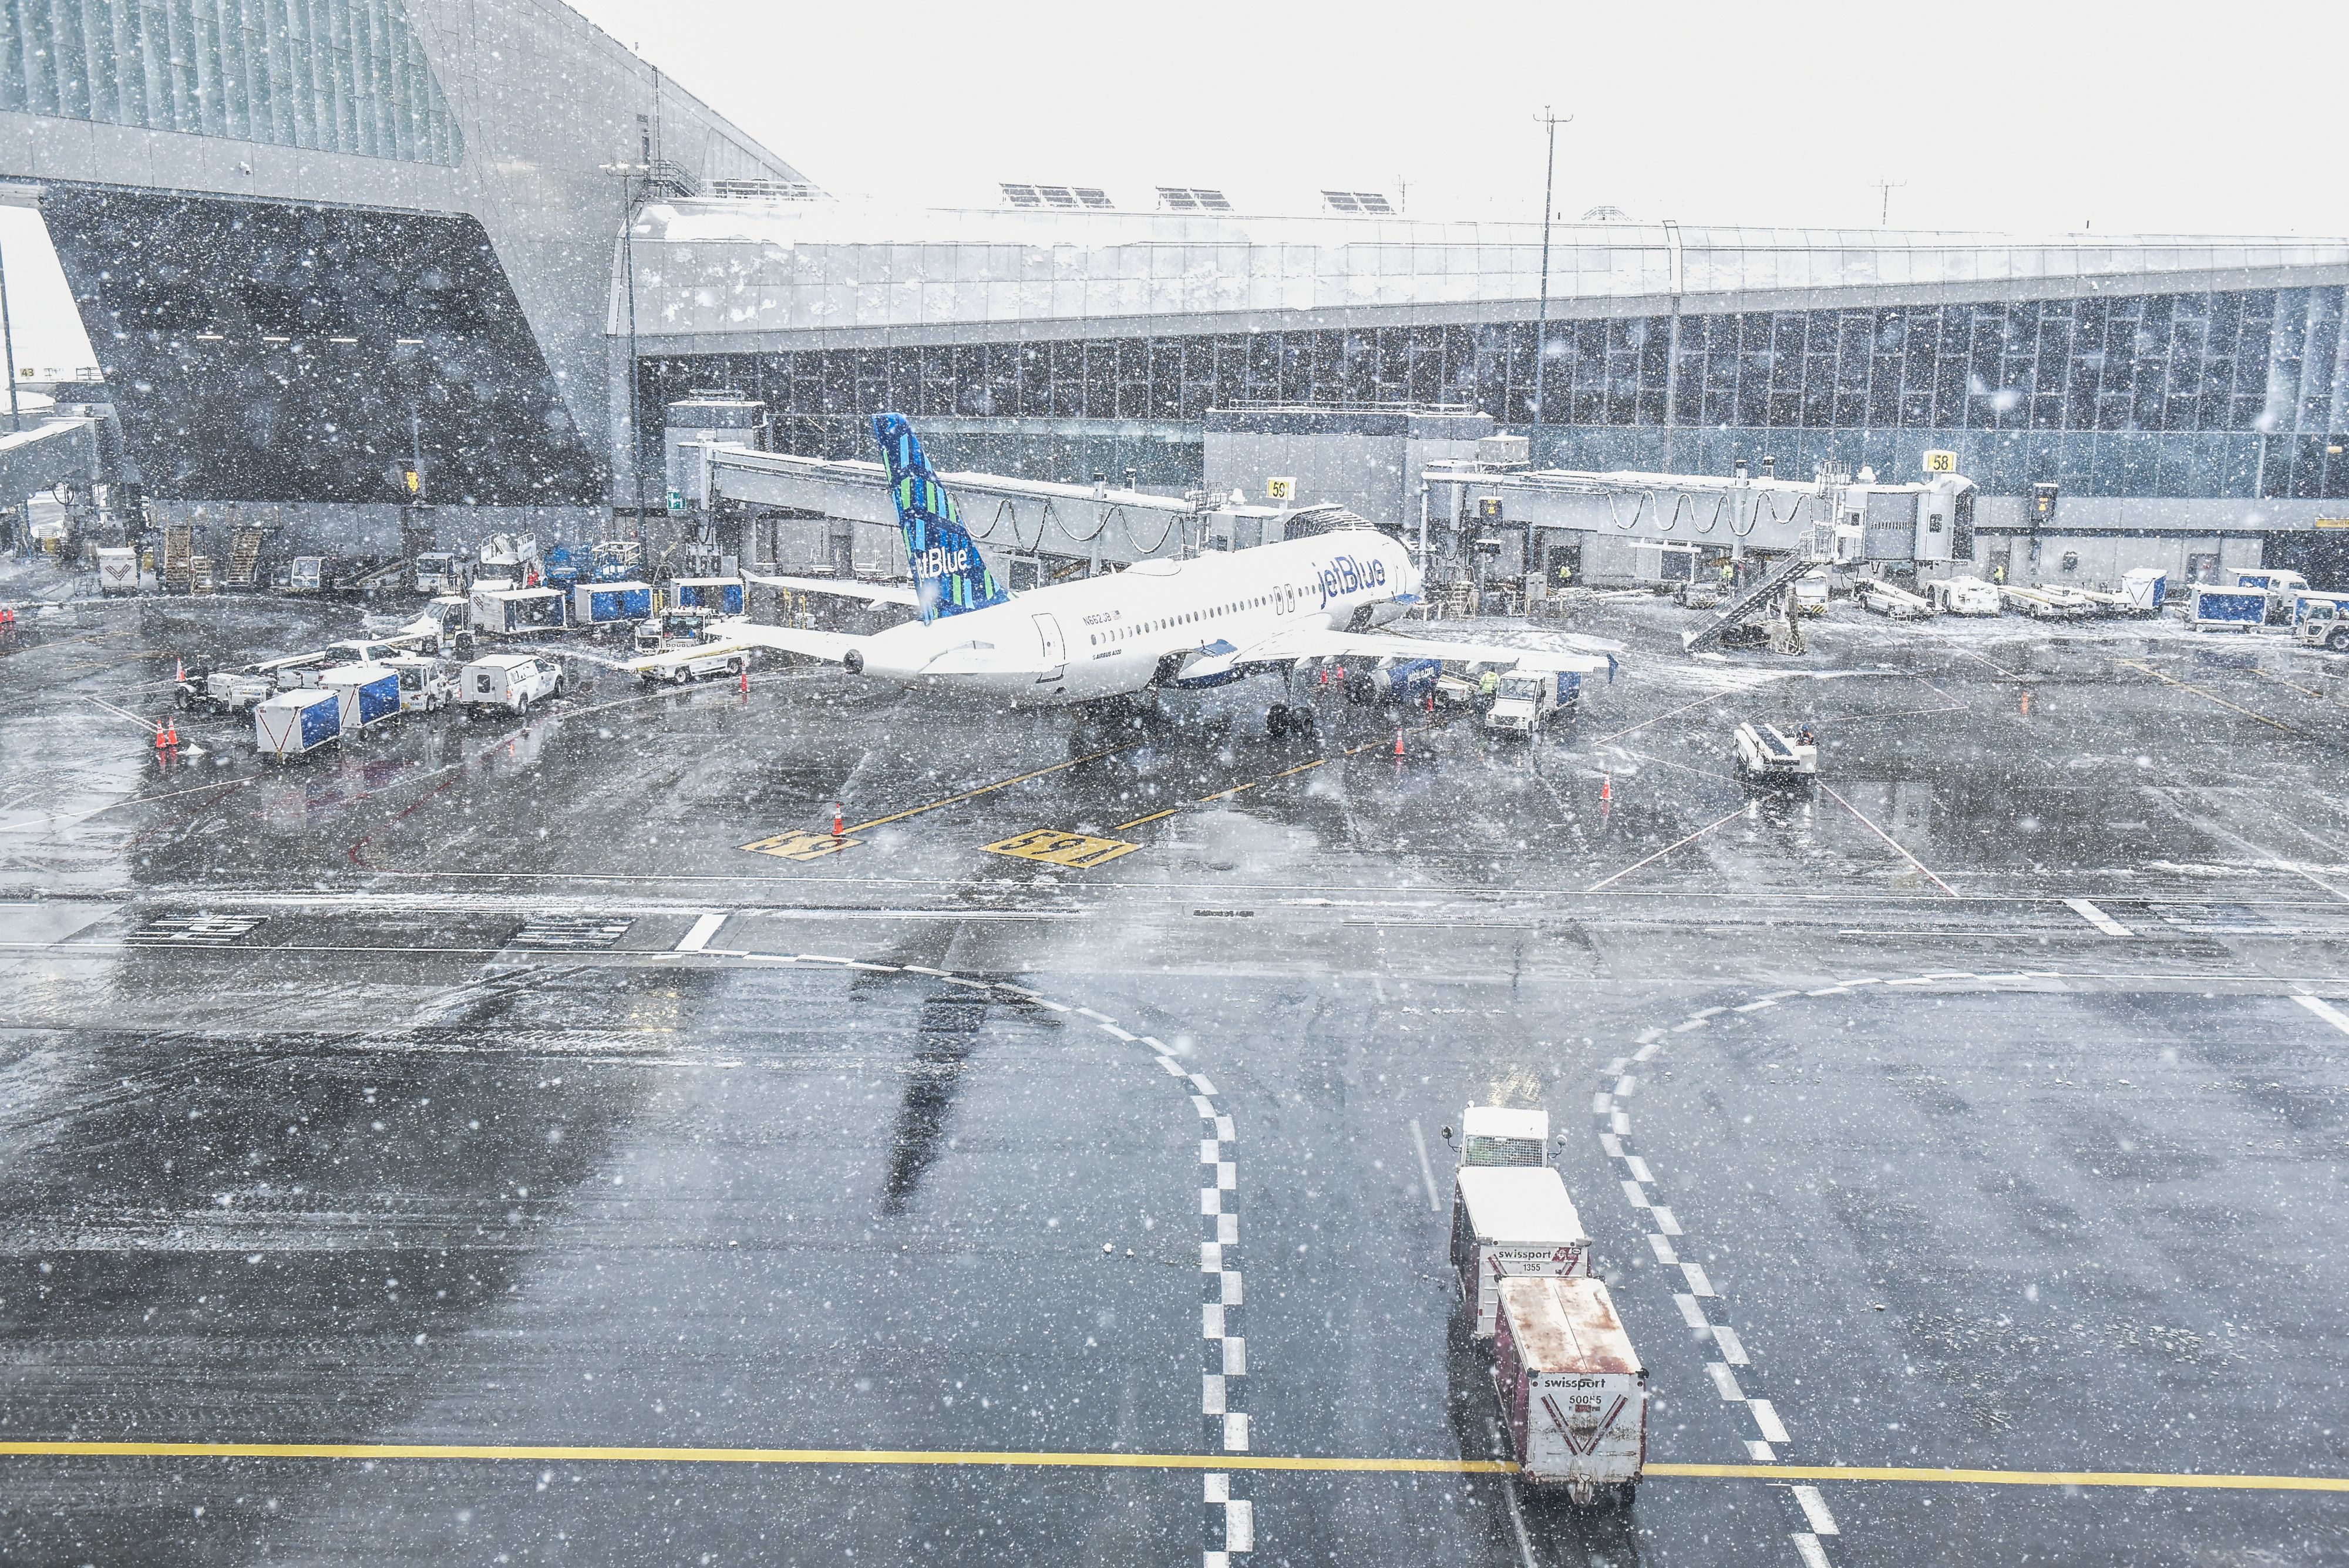 A JetBlue aircraft during the snowstorm at LaGuardia Airport on Feb. 13.